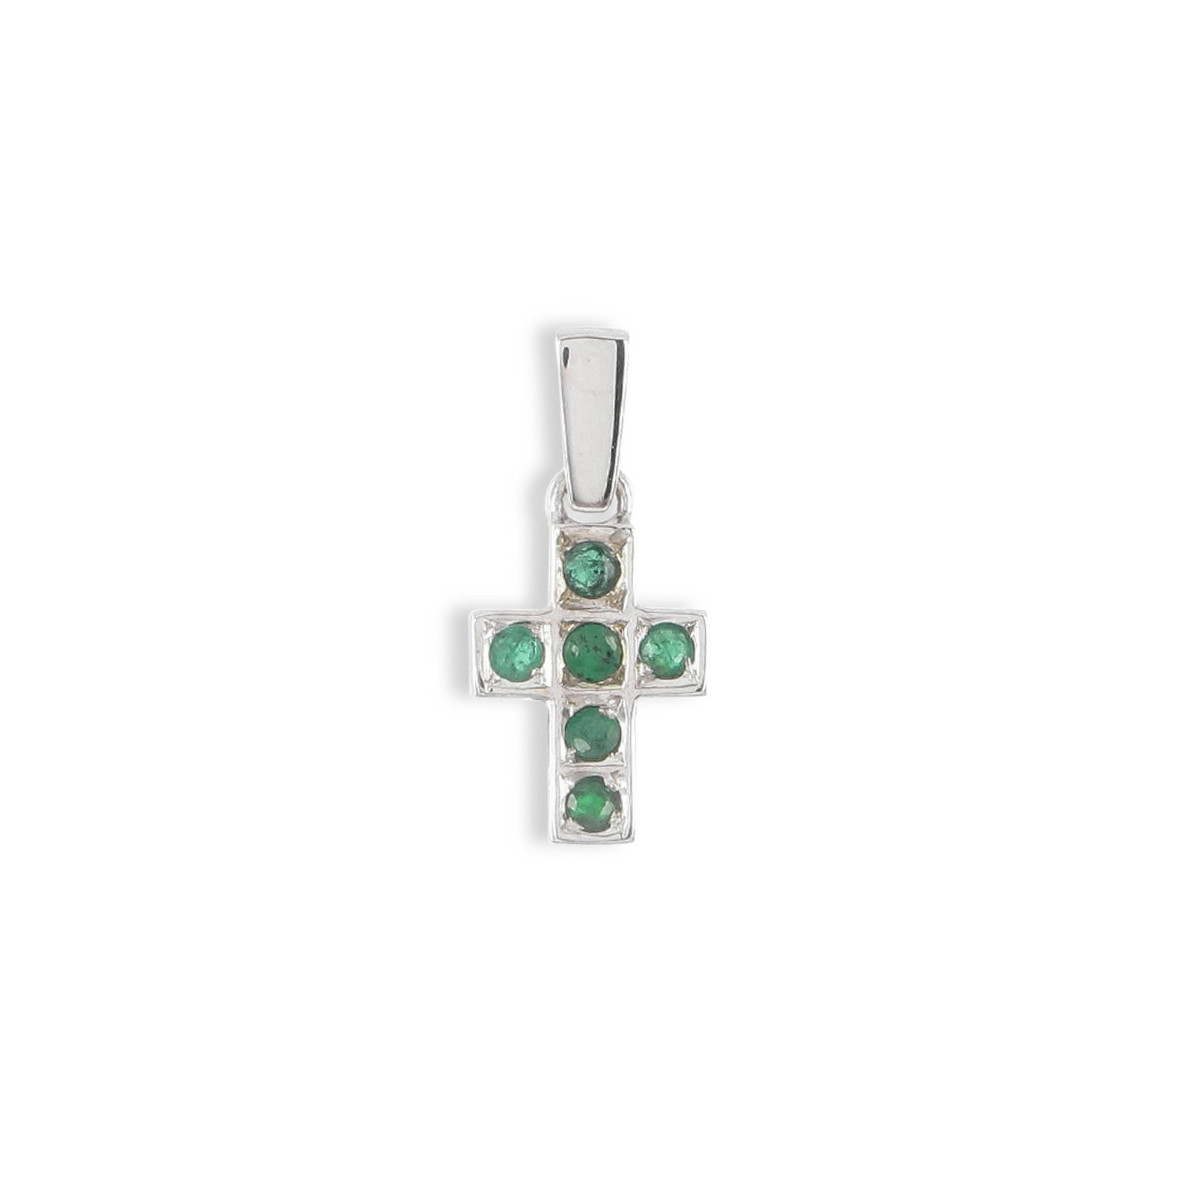 WHITE GOLD CROSS WITH EMERALD